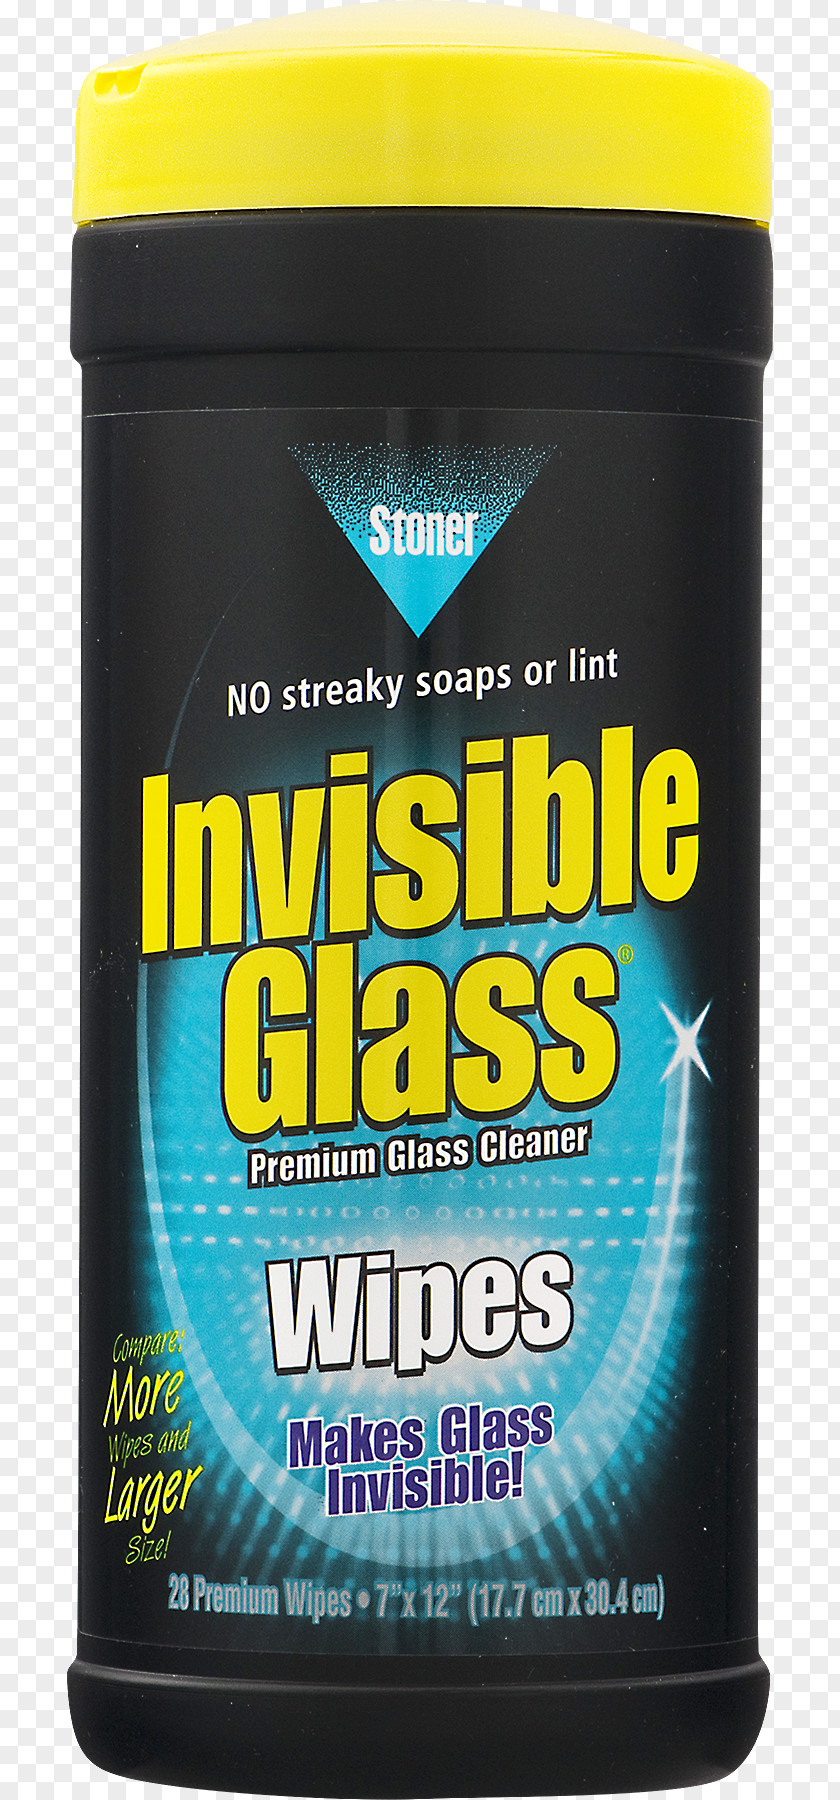 Dietary Supplement Brand Stoner Invisible Glass Cleaner Stoner, Inc. Product PNG